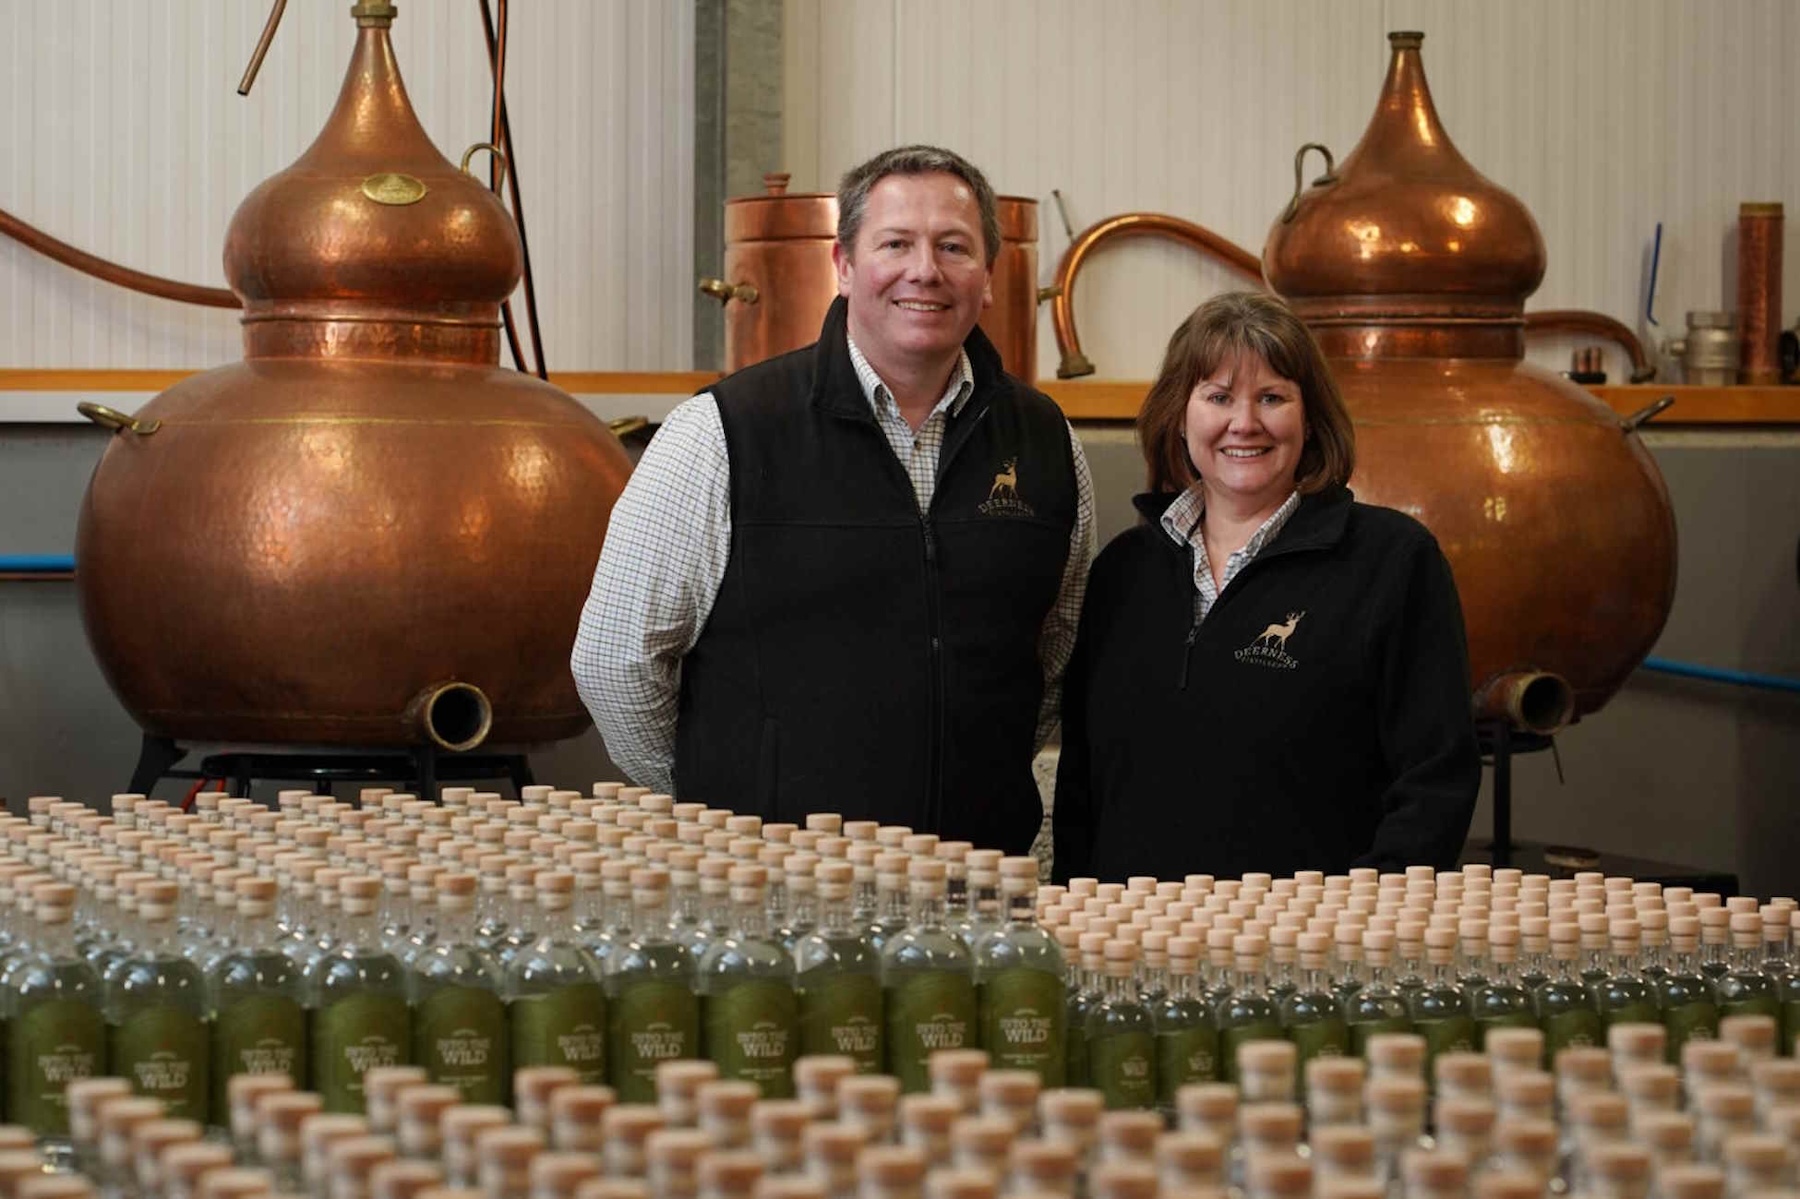 Family-owned Orcadian distillery receives £246k grant for whisky expansion